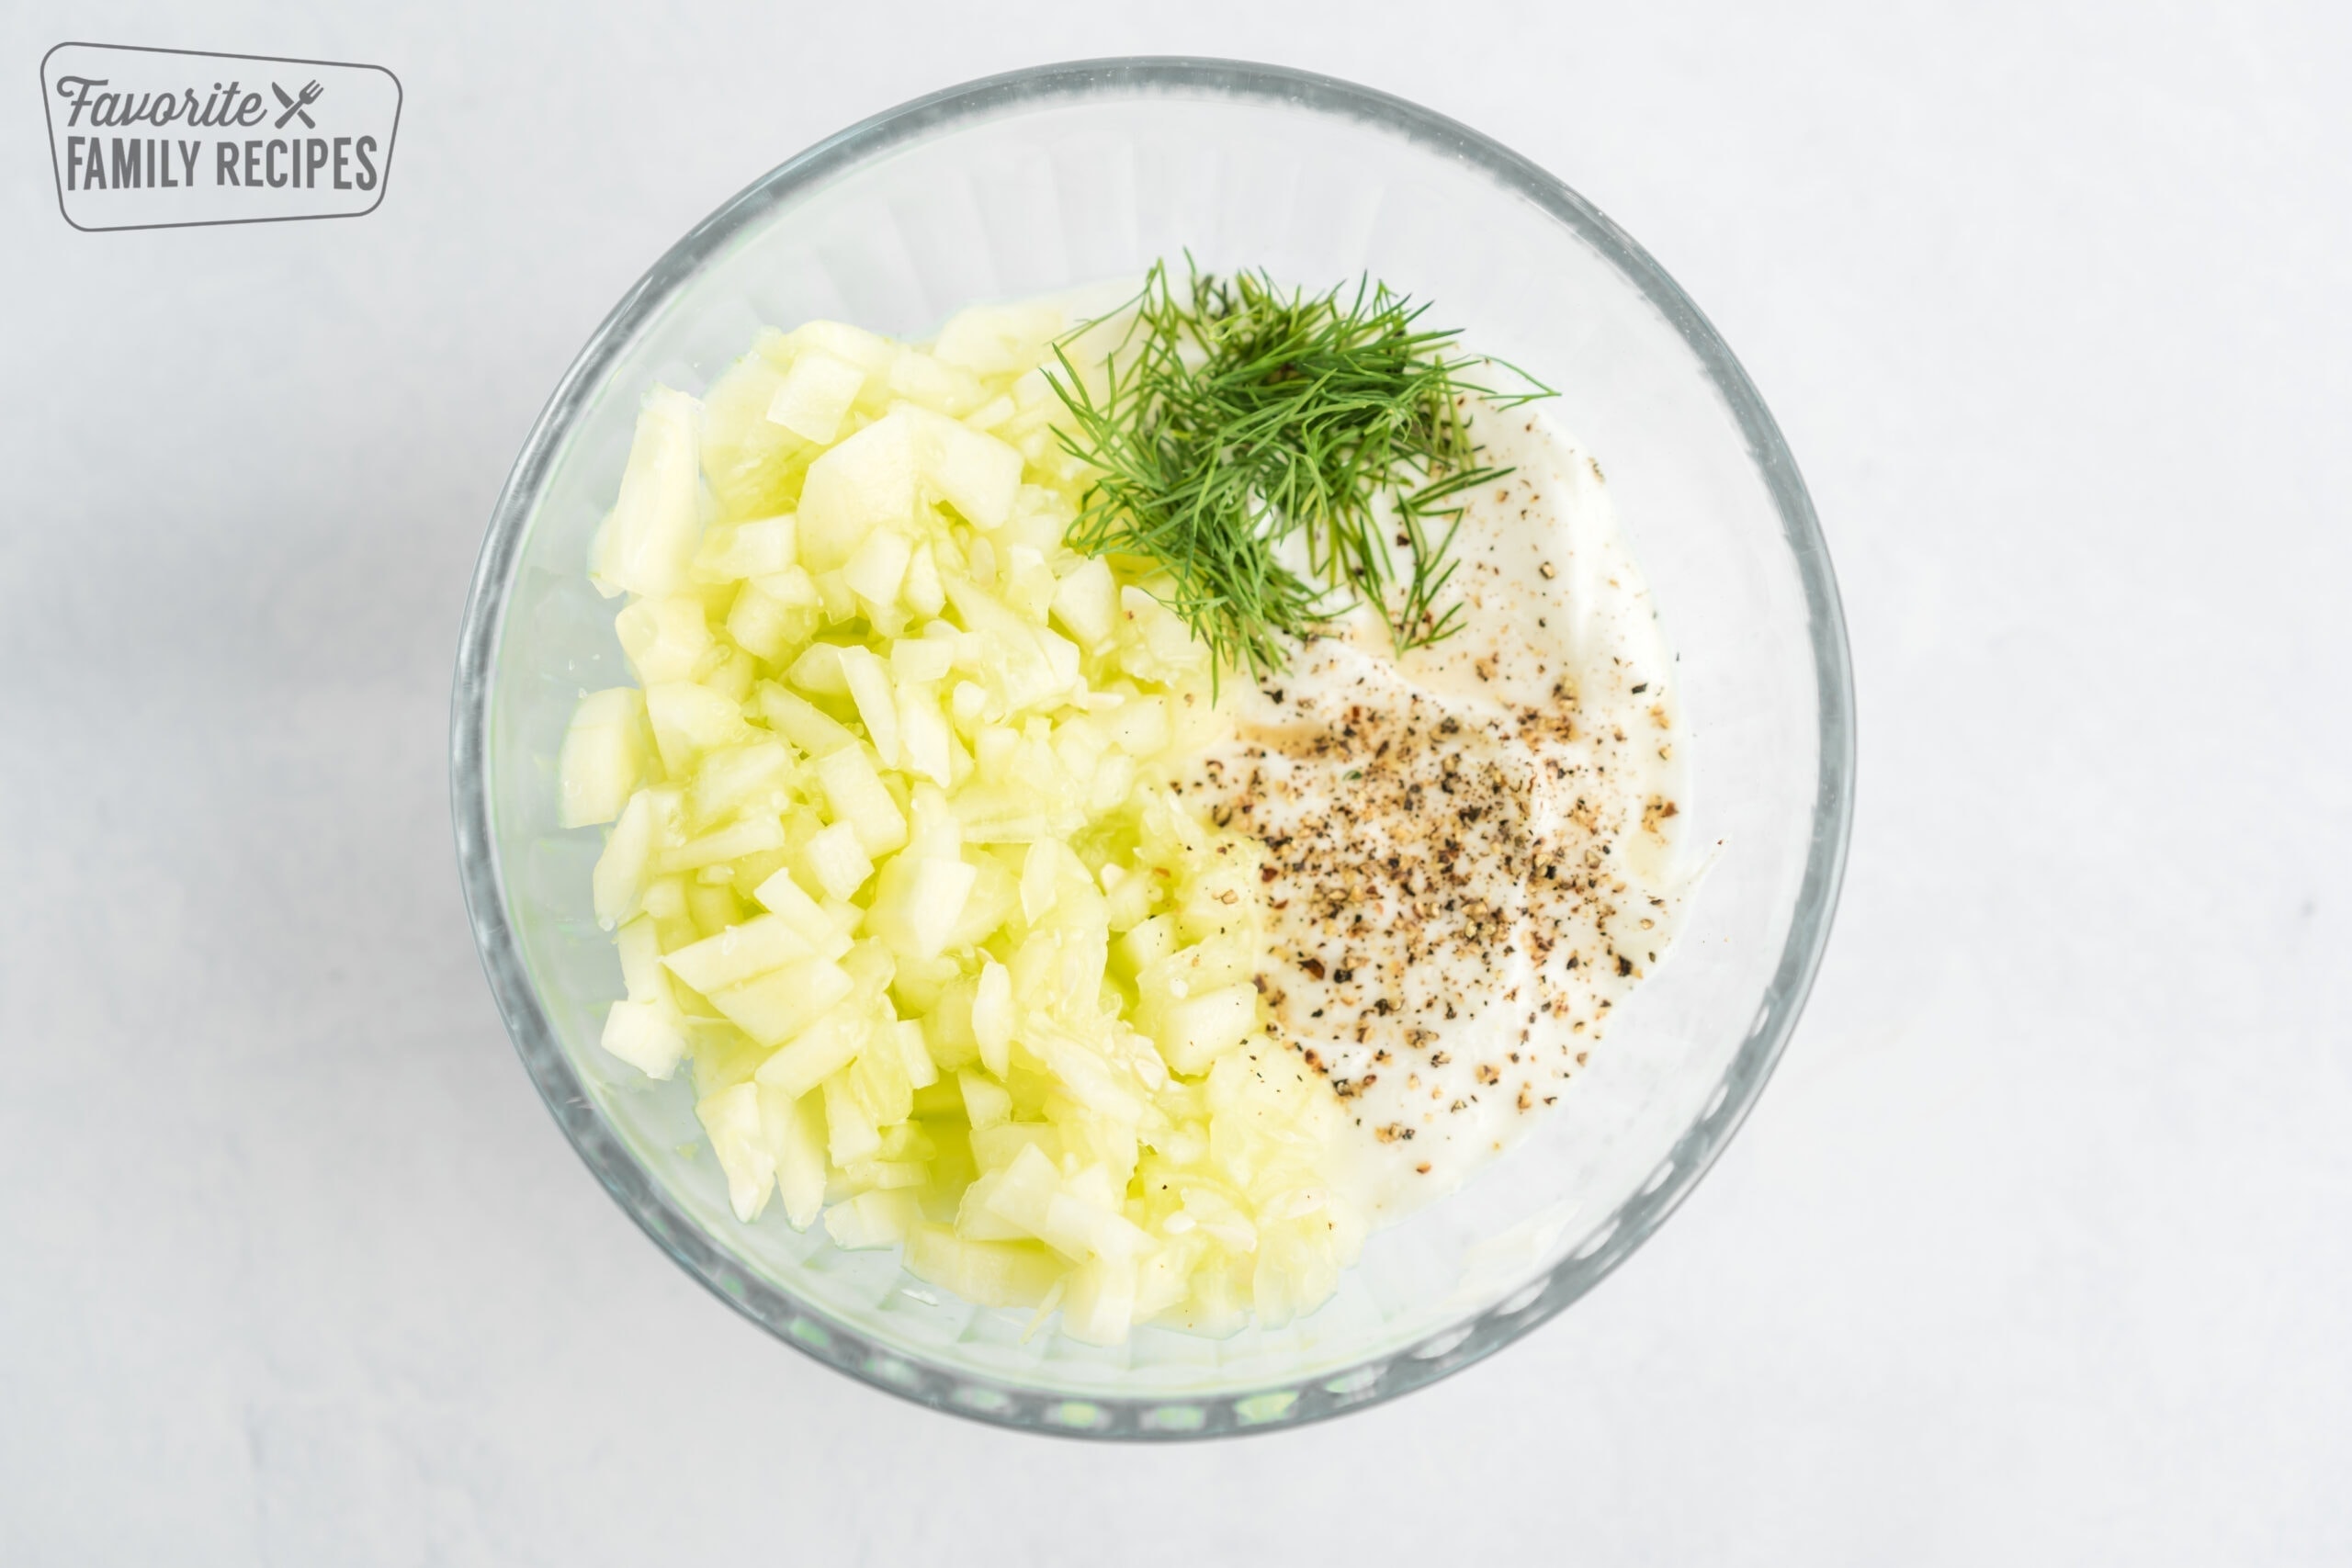 ingredients for tzatziki sauce in a bowl